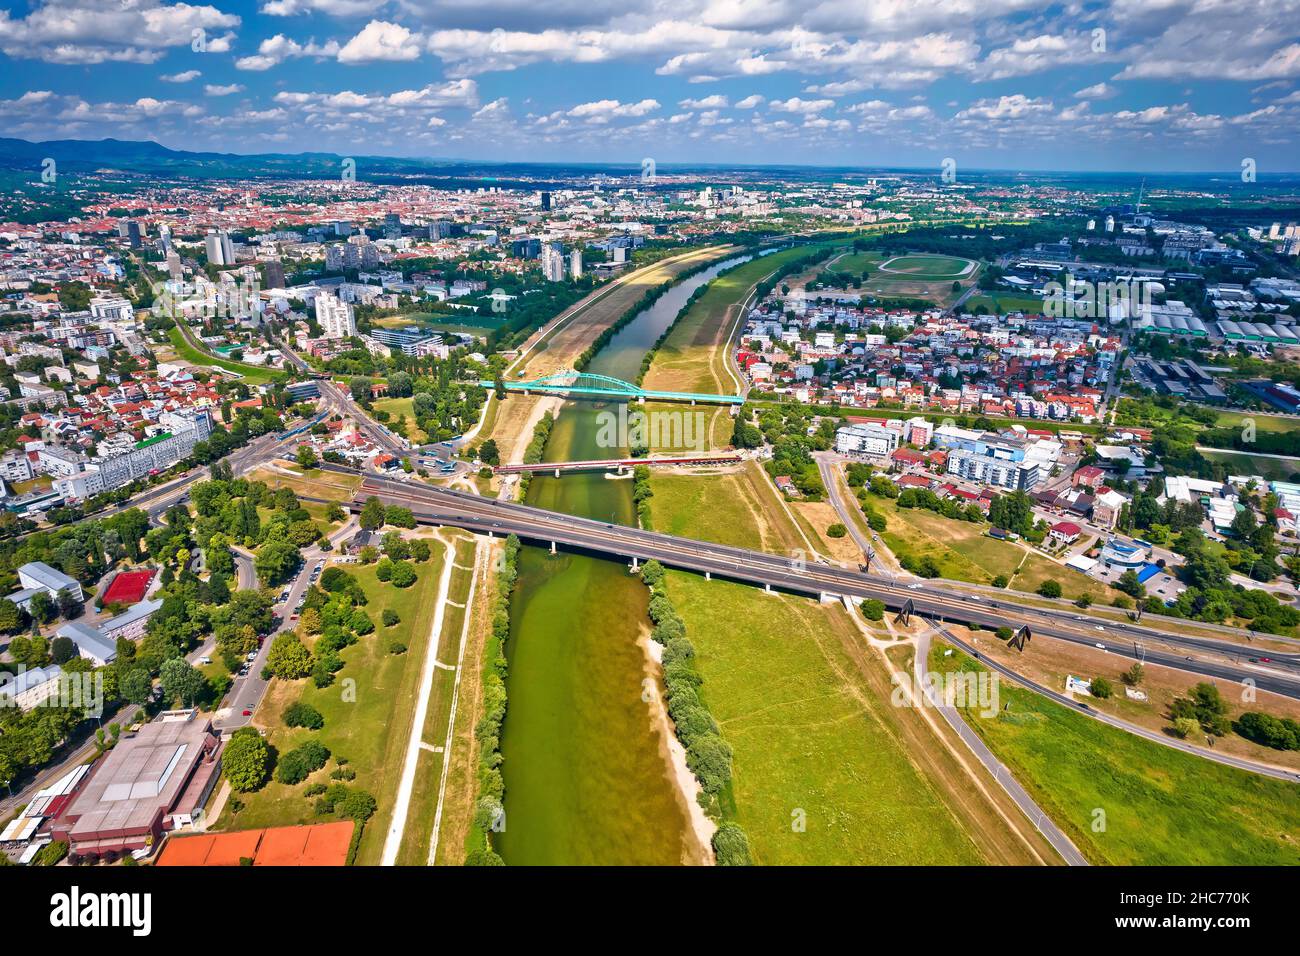 Zagreb. Aerial view of Sava river and city of Zagreb panorama, capital of Croatia Stock Photo